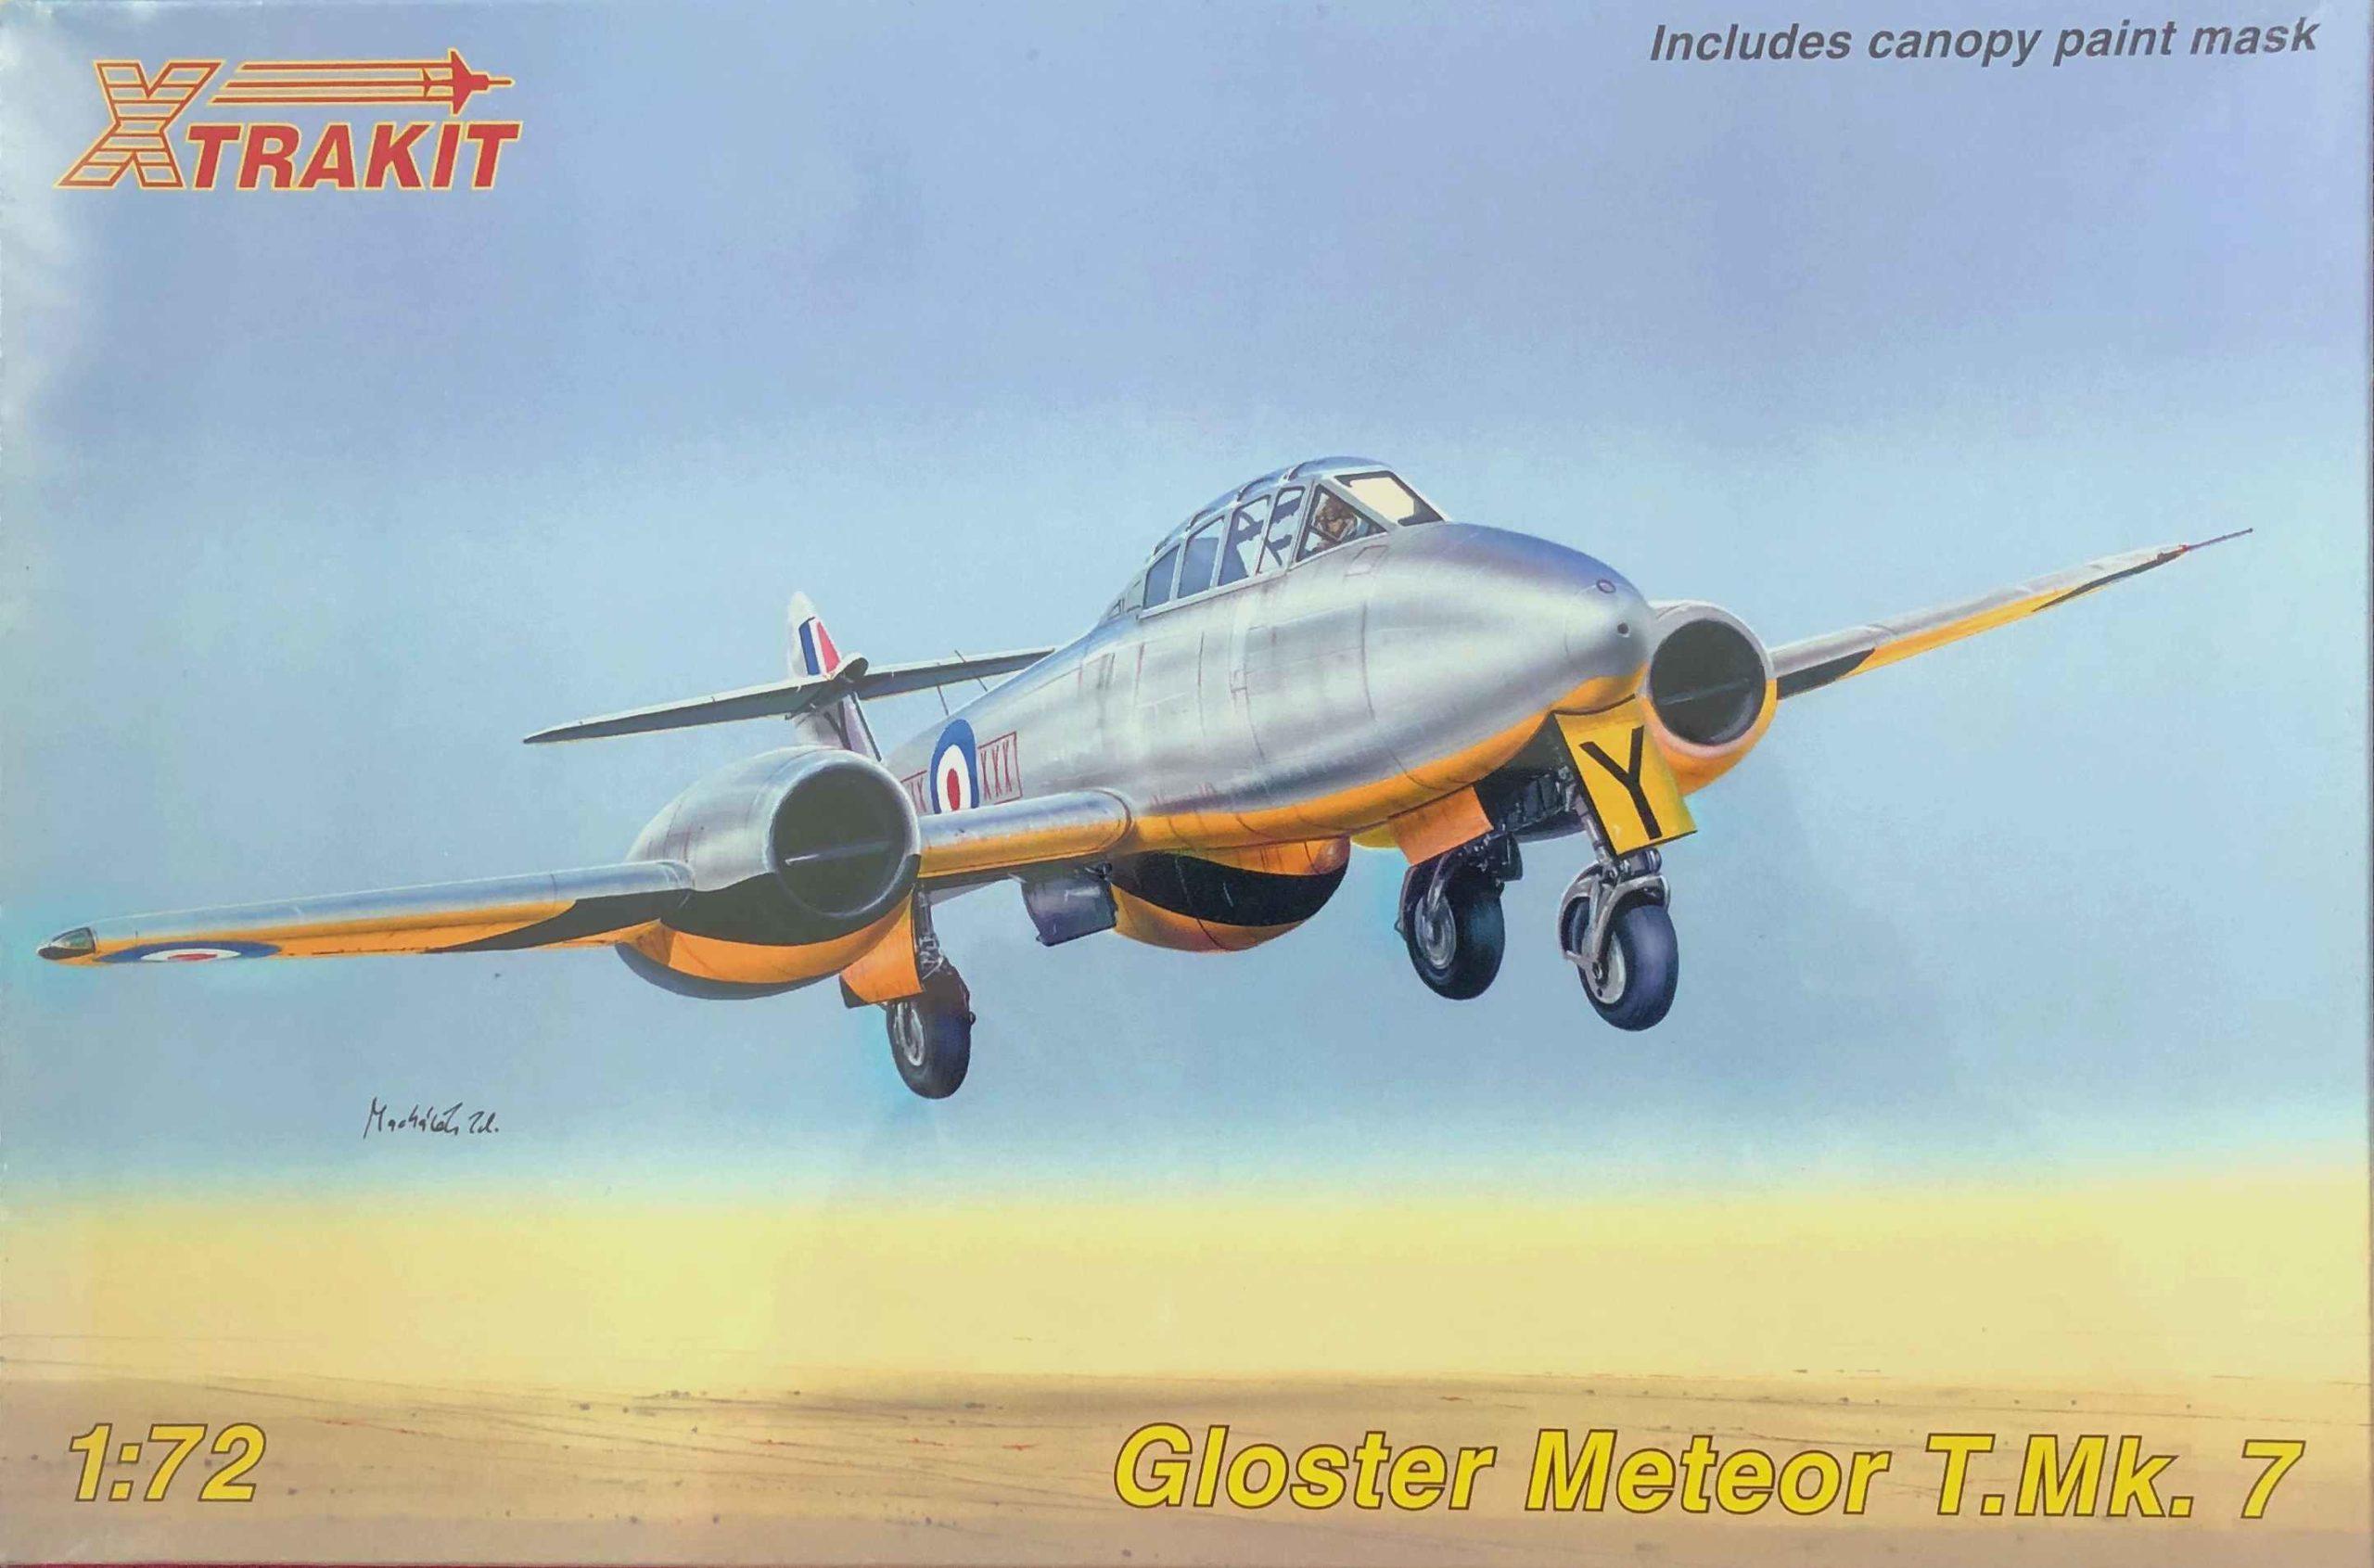 Gloster Meteor T.Mk. 7